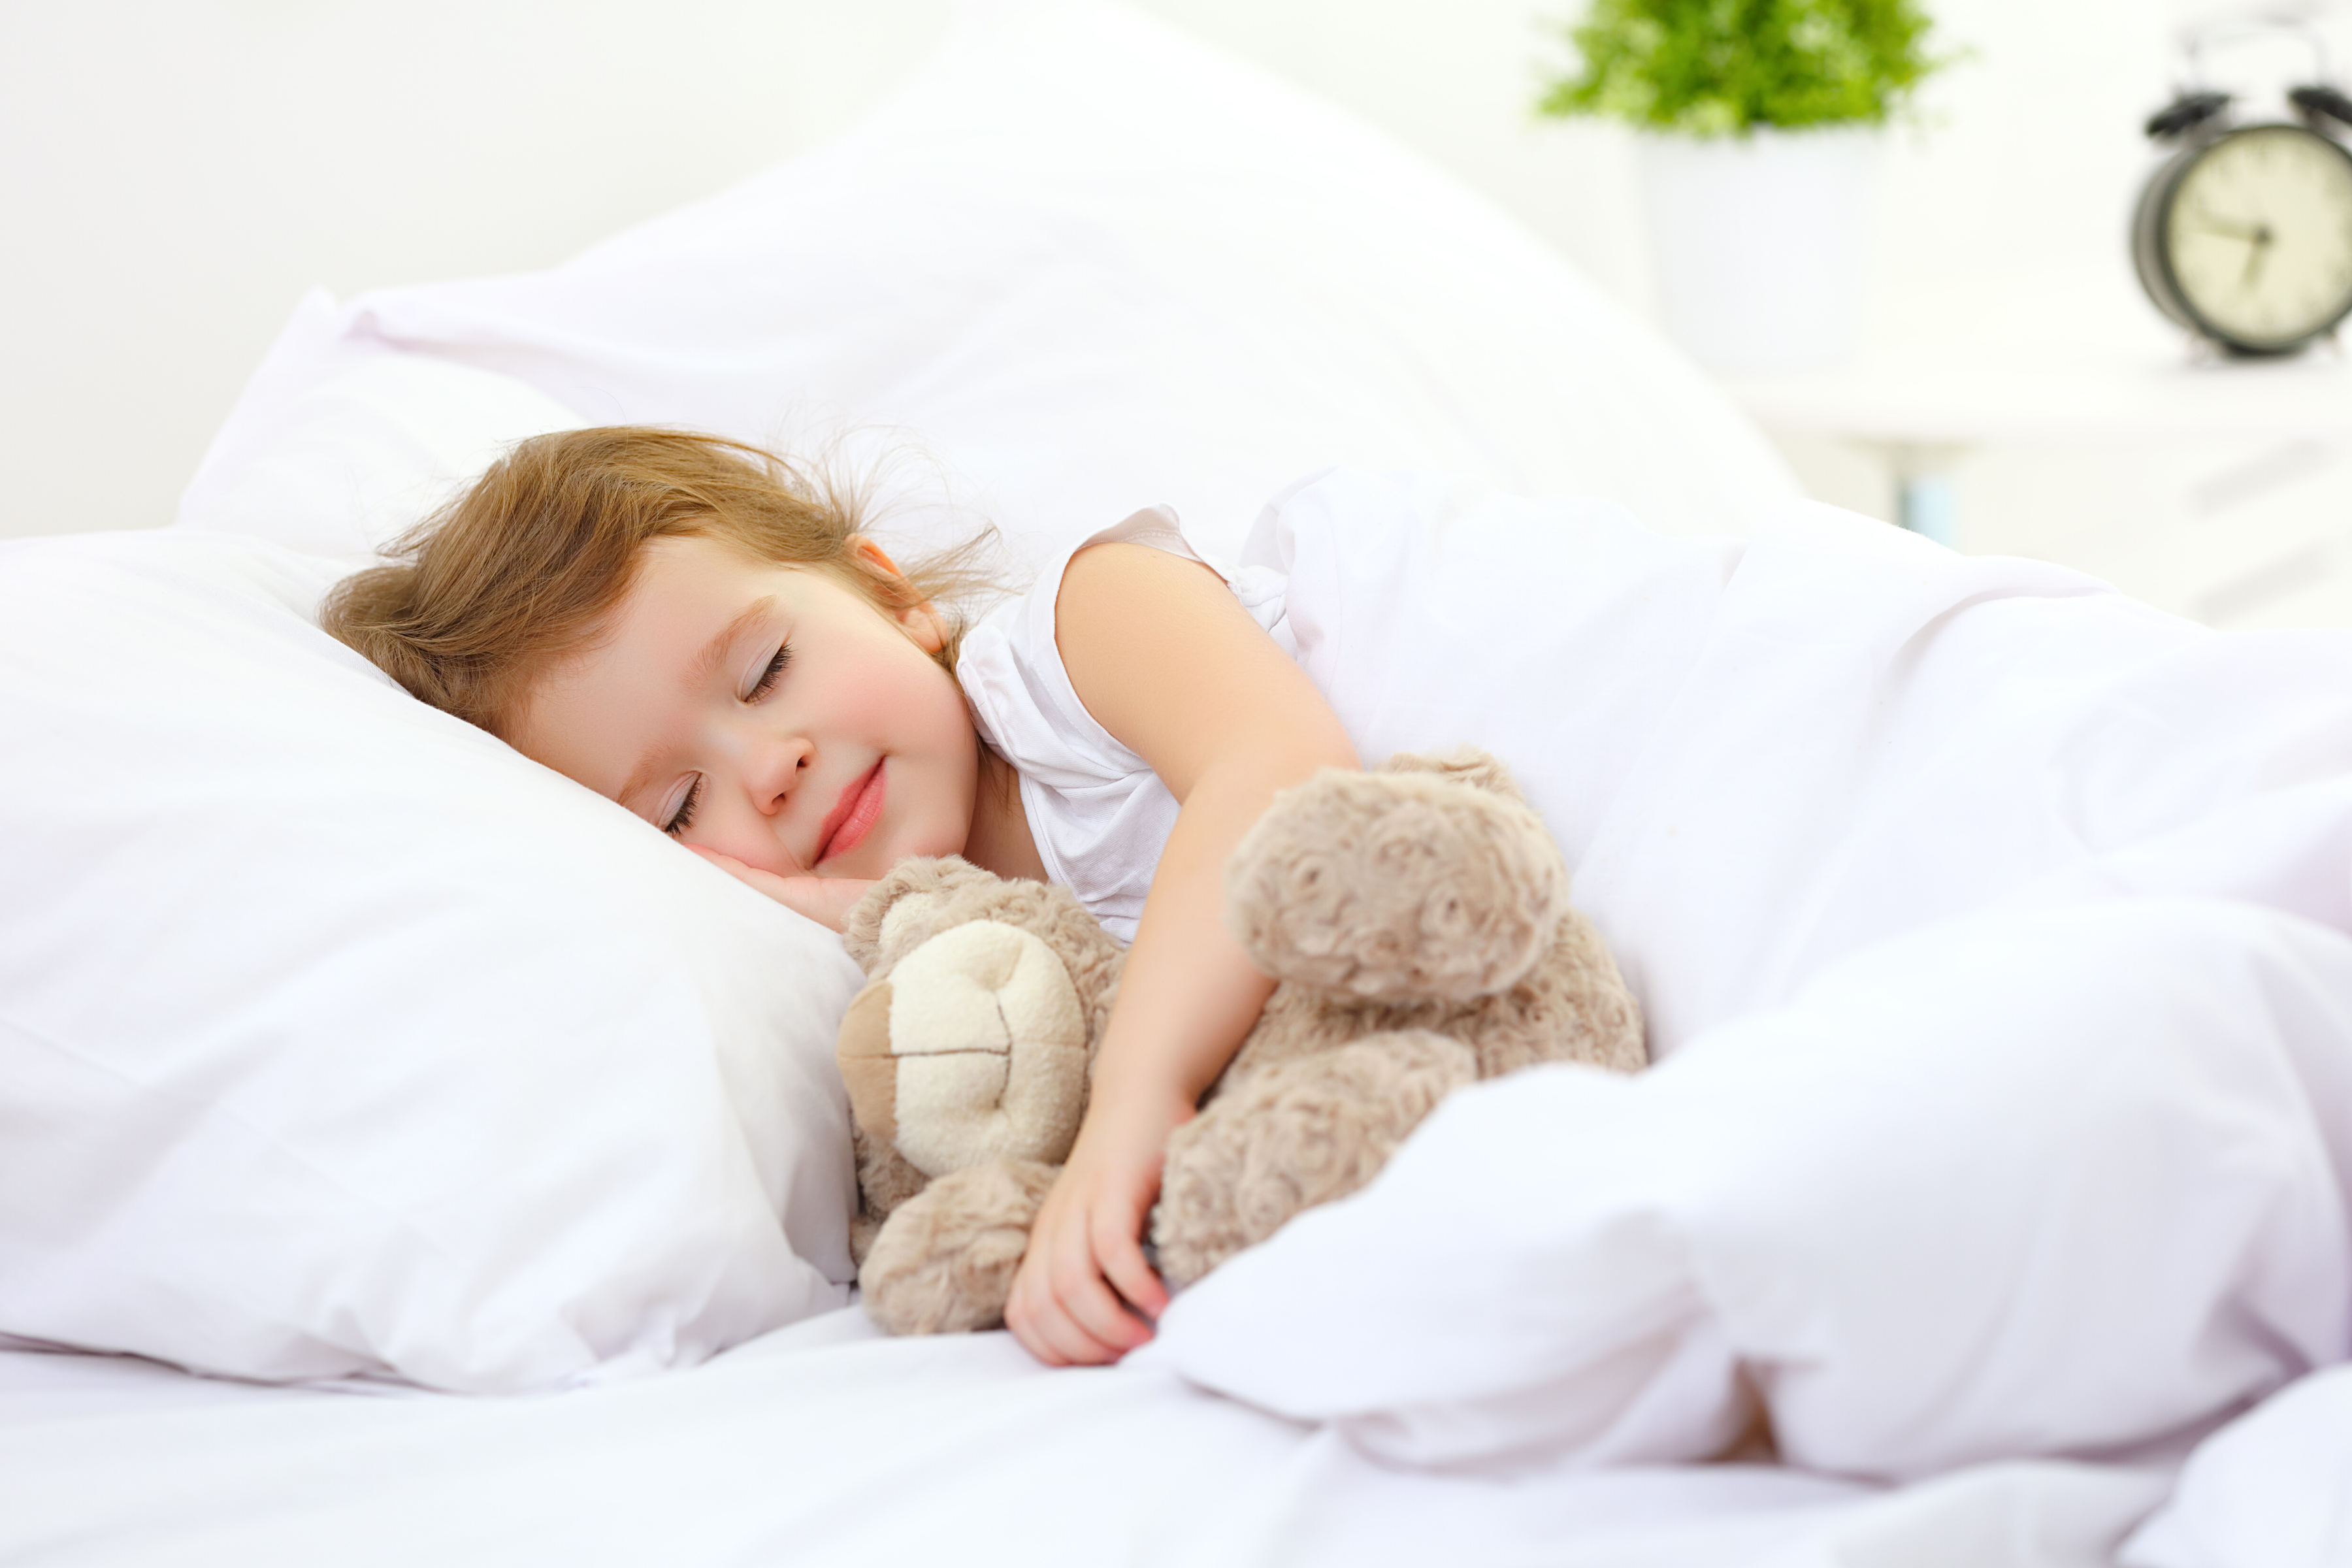 Toddler sleeping in bed while holding a teddy bear